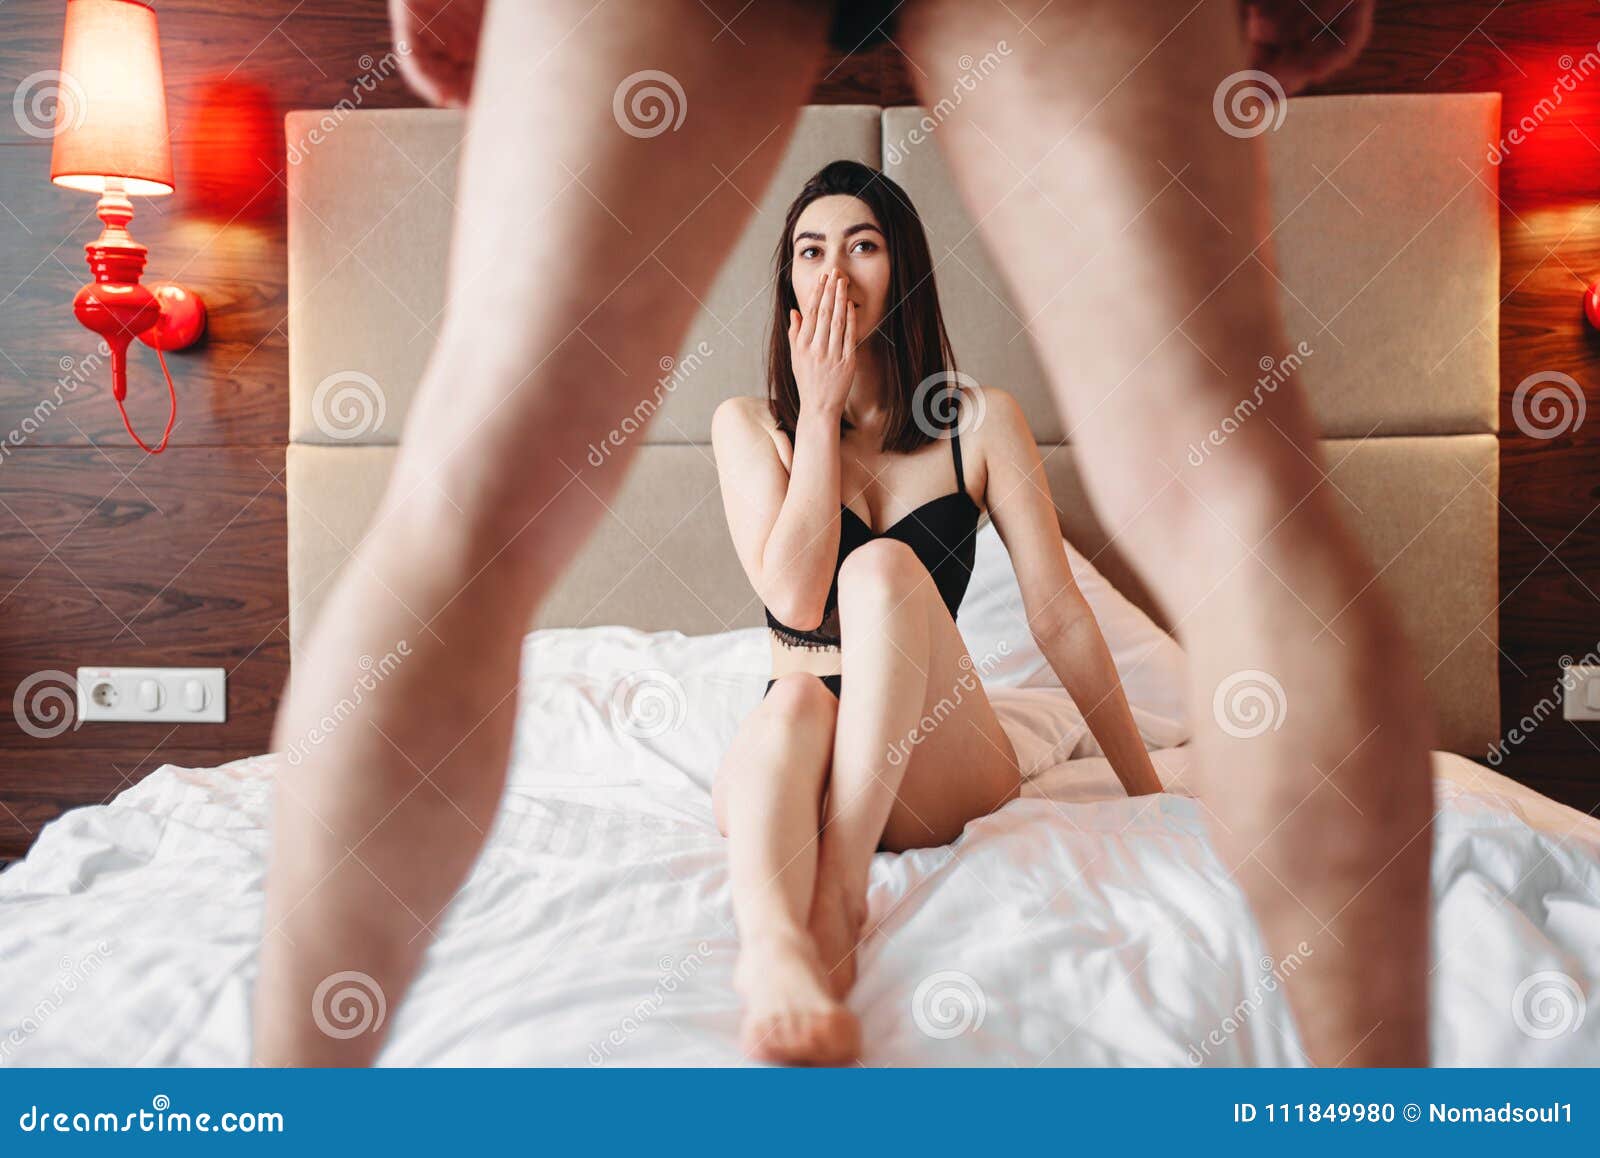 Sex Lovers in Bed, Big Surprise, Delight Stock Photo